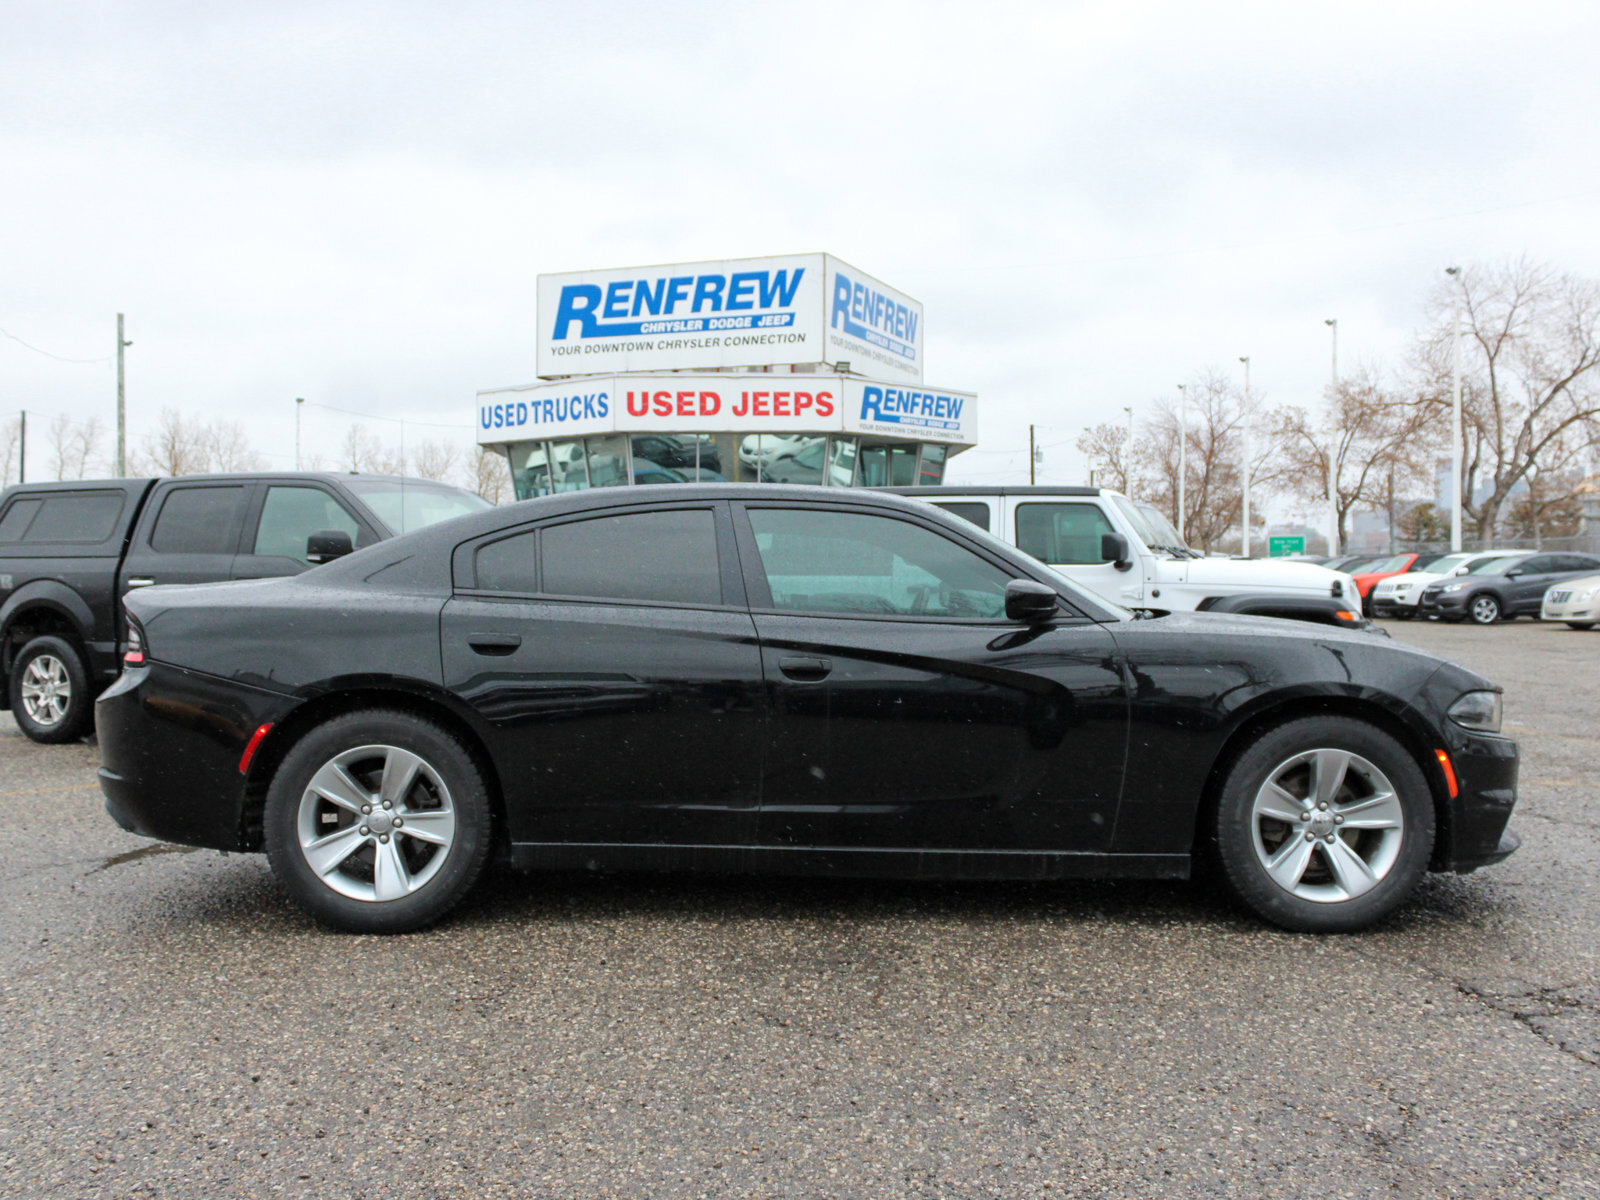 2015 Dodge Charger SXT RWD, Heated Seats, Remote Start